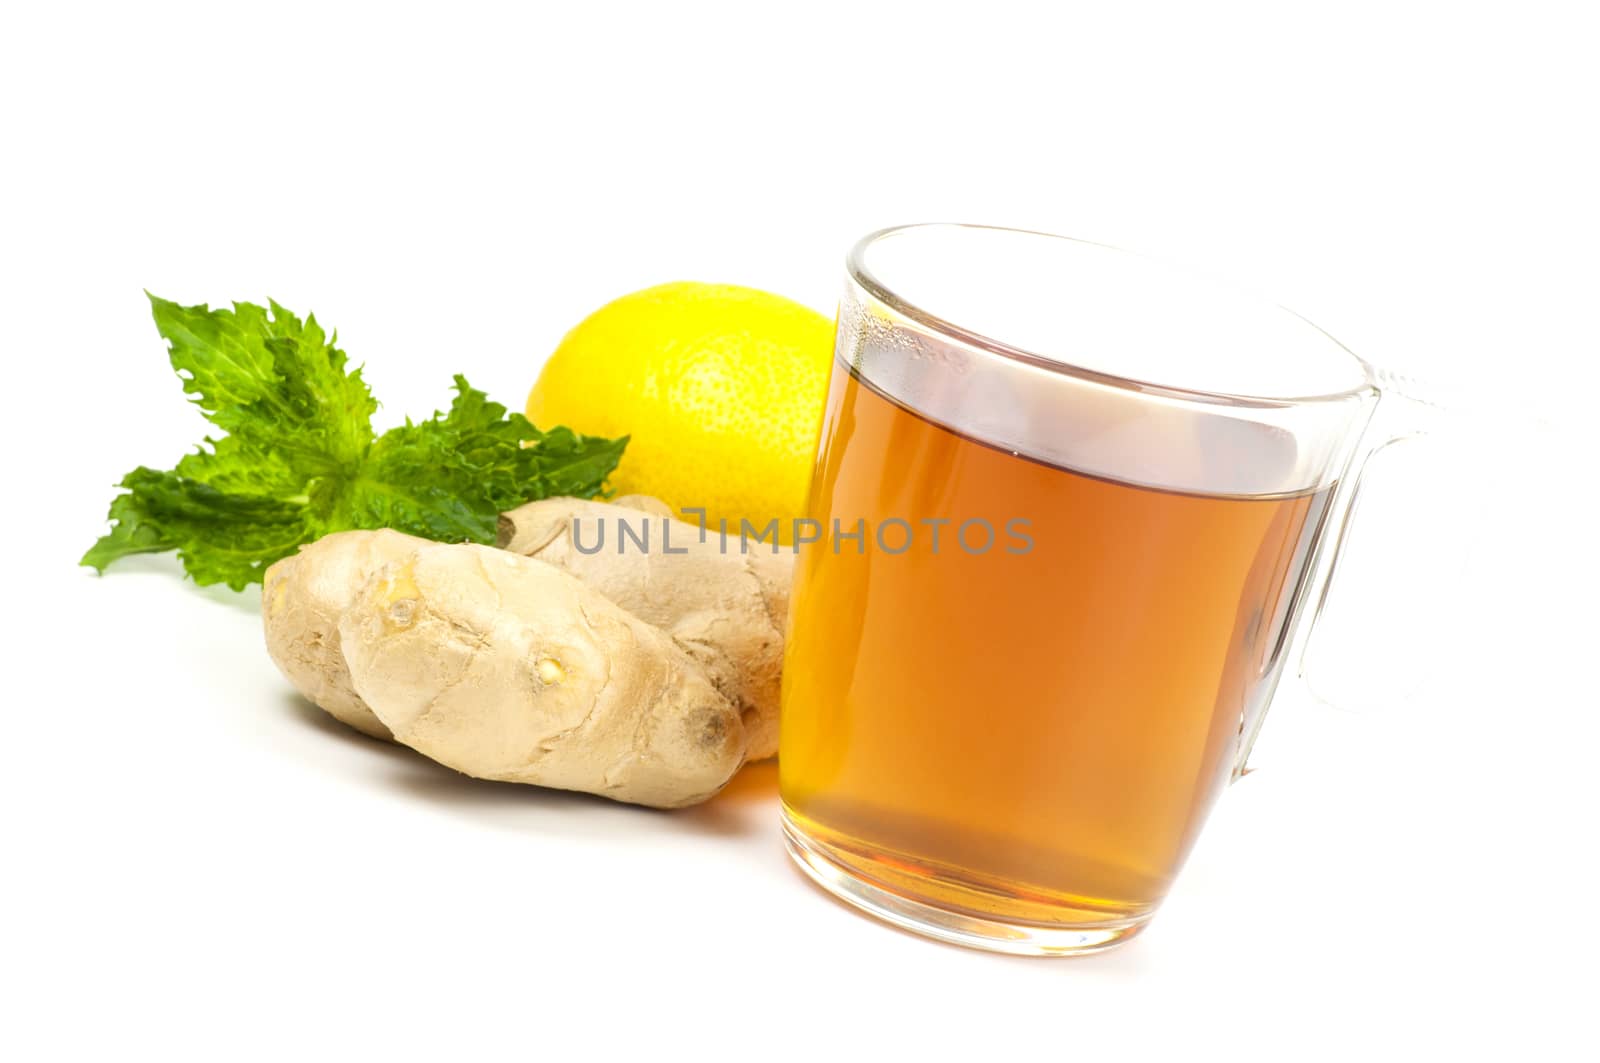 Cup of black tea with ginger, lemon and mint by dred